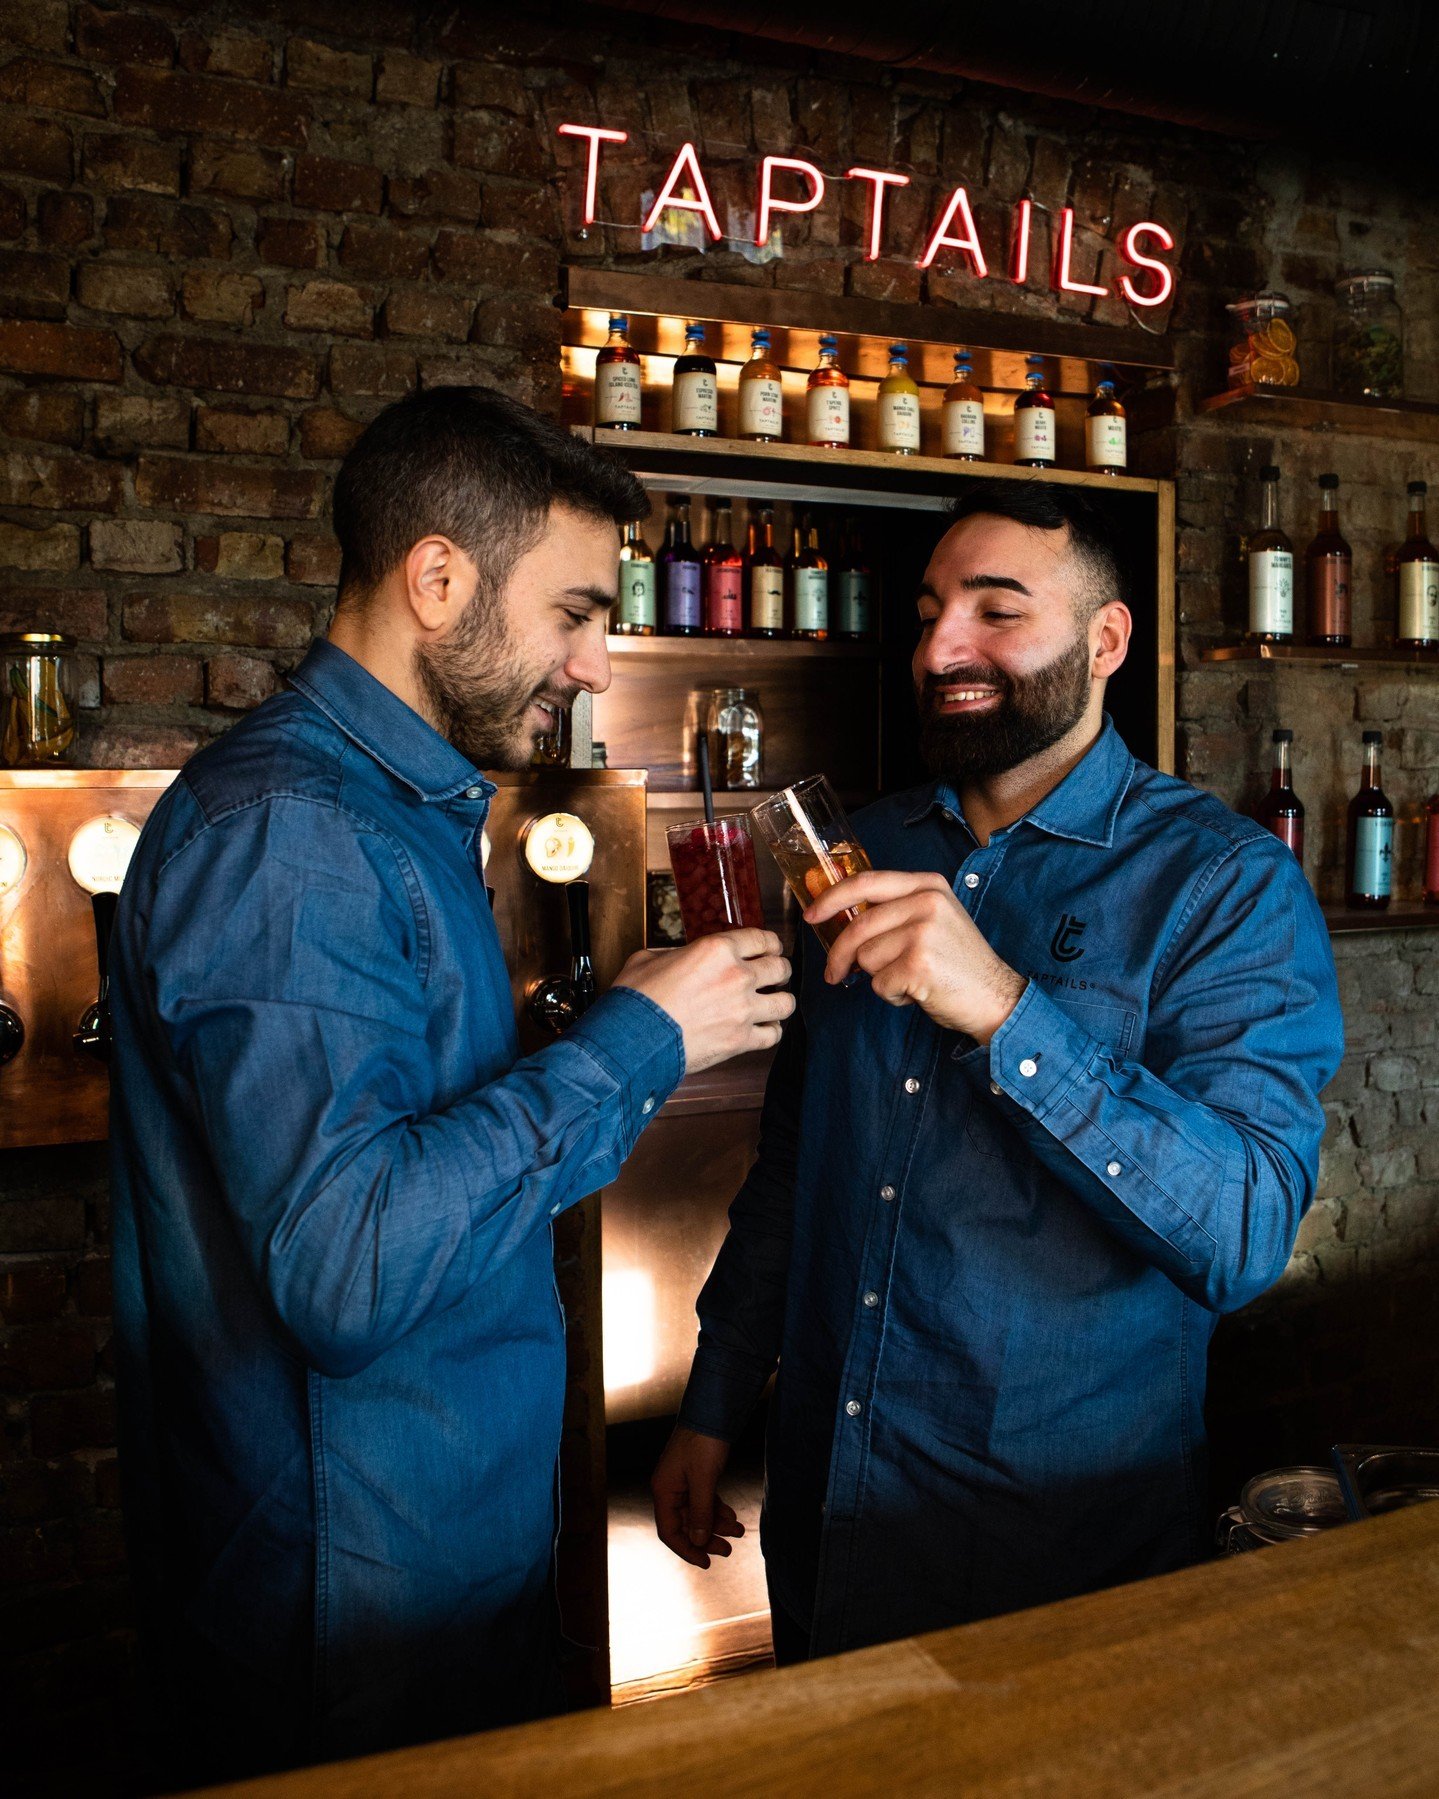 Nothing else to do than a big cheers and a smile with Taptails in your hand 😎 🍹 Both behind and in front of the bar you'll see smiles - all because of the delicious taste and the superfast making and delivery! Just tap it, and you'll have your perf